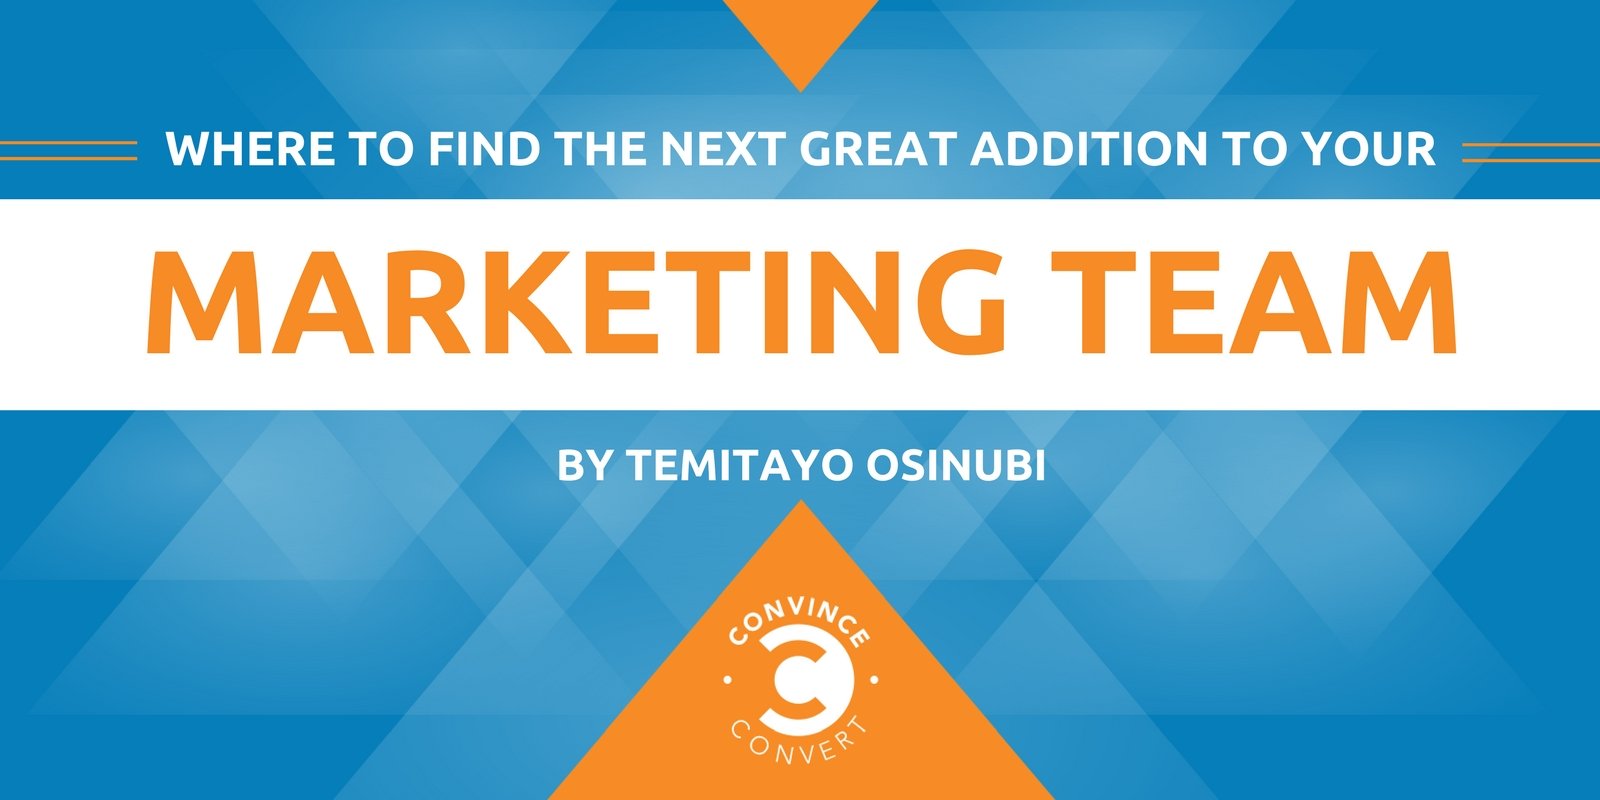 Where to Find the Next Great Addition to Your Marketing Team